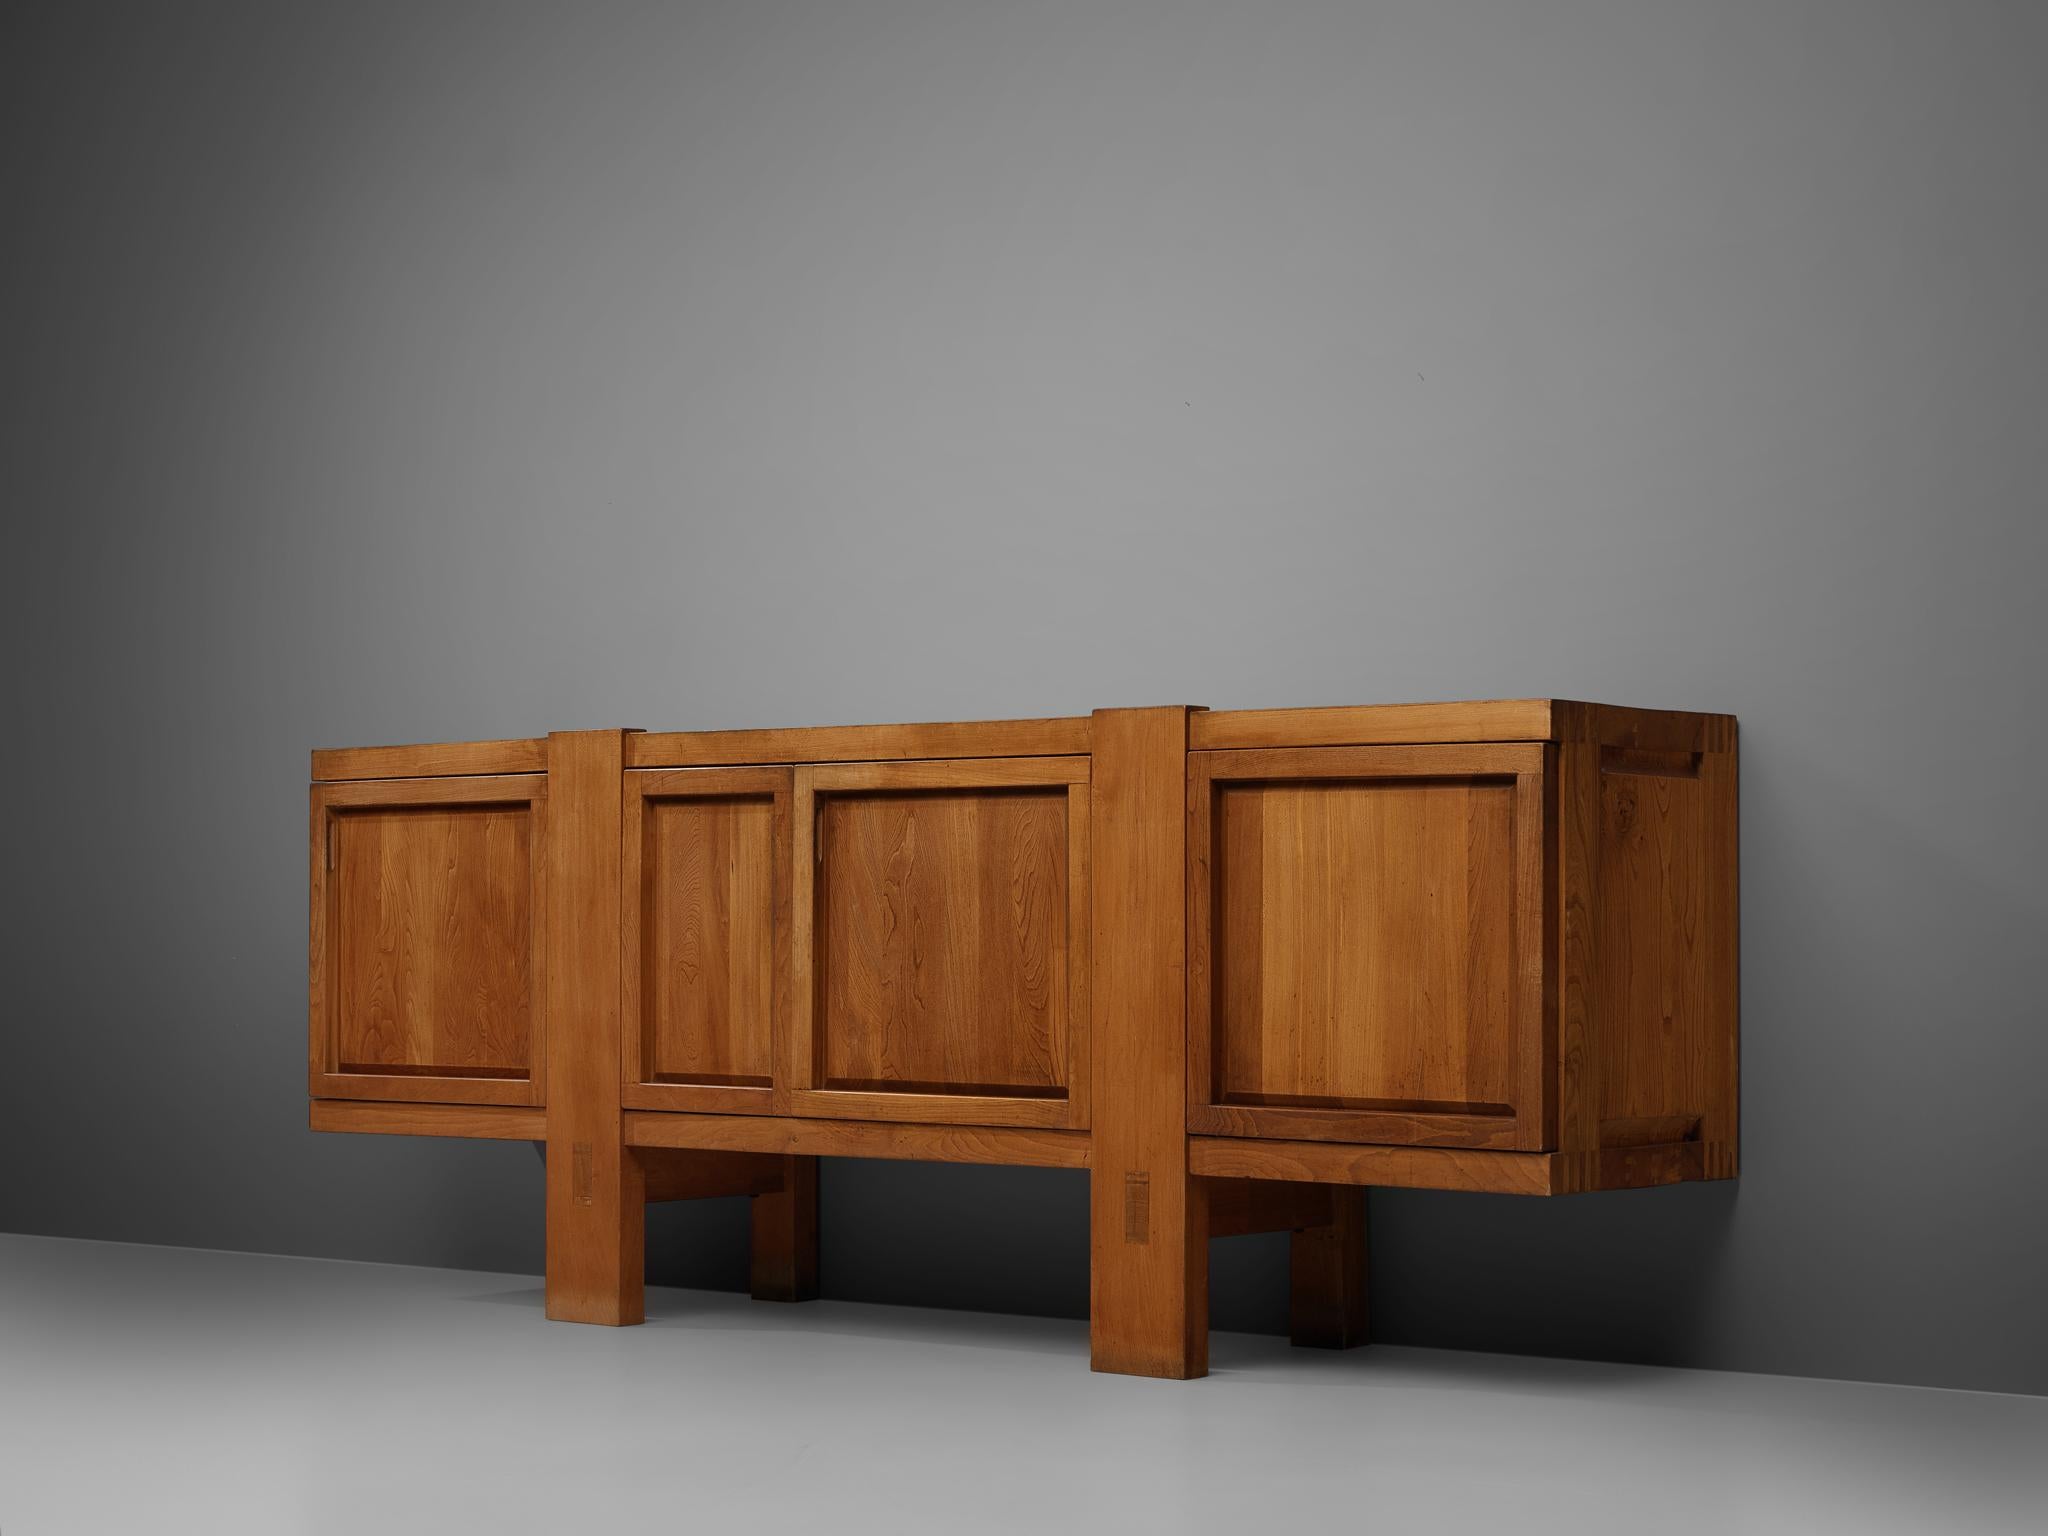 Pierre Chapo, sideboard model R16, elmwood, France, late 1960s

This exquisitely crafted credenza combines a simplified yet complex design combined with nifty, solid construction details that characterize Chapo's work. Chapo responded to a